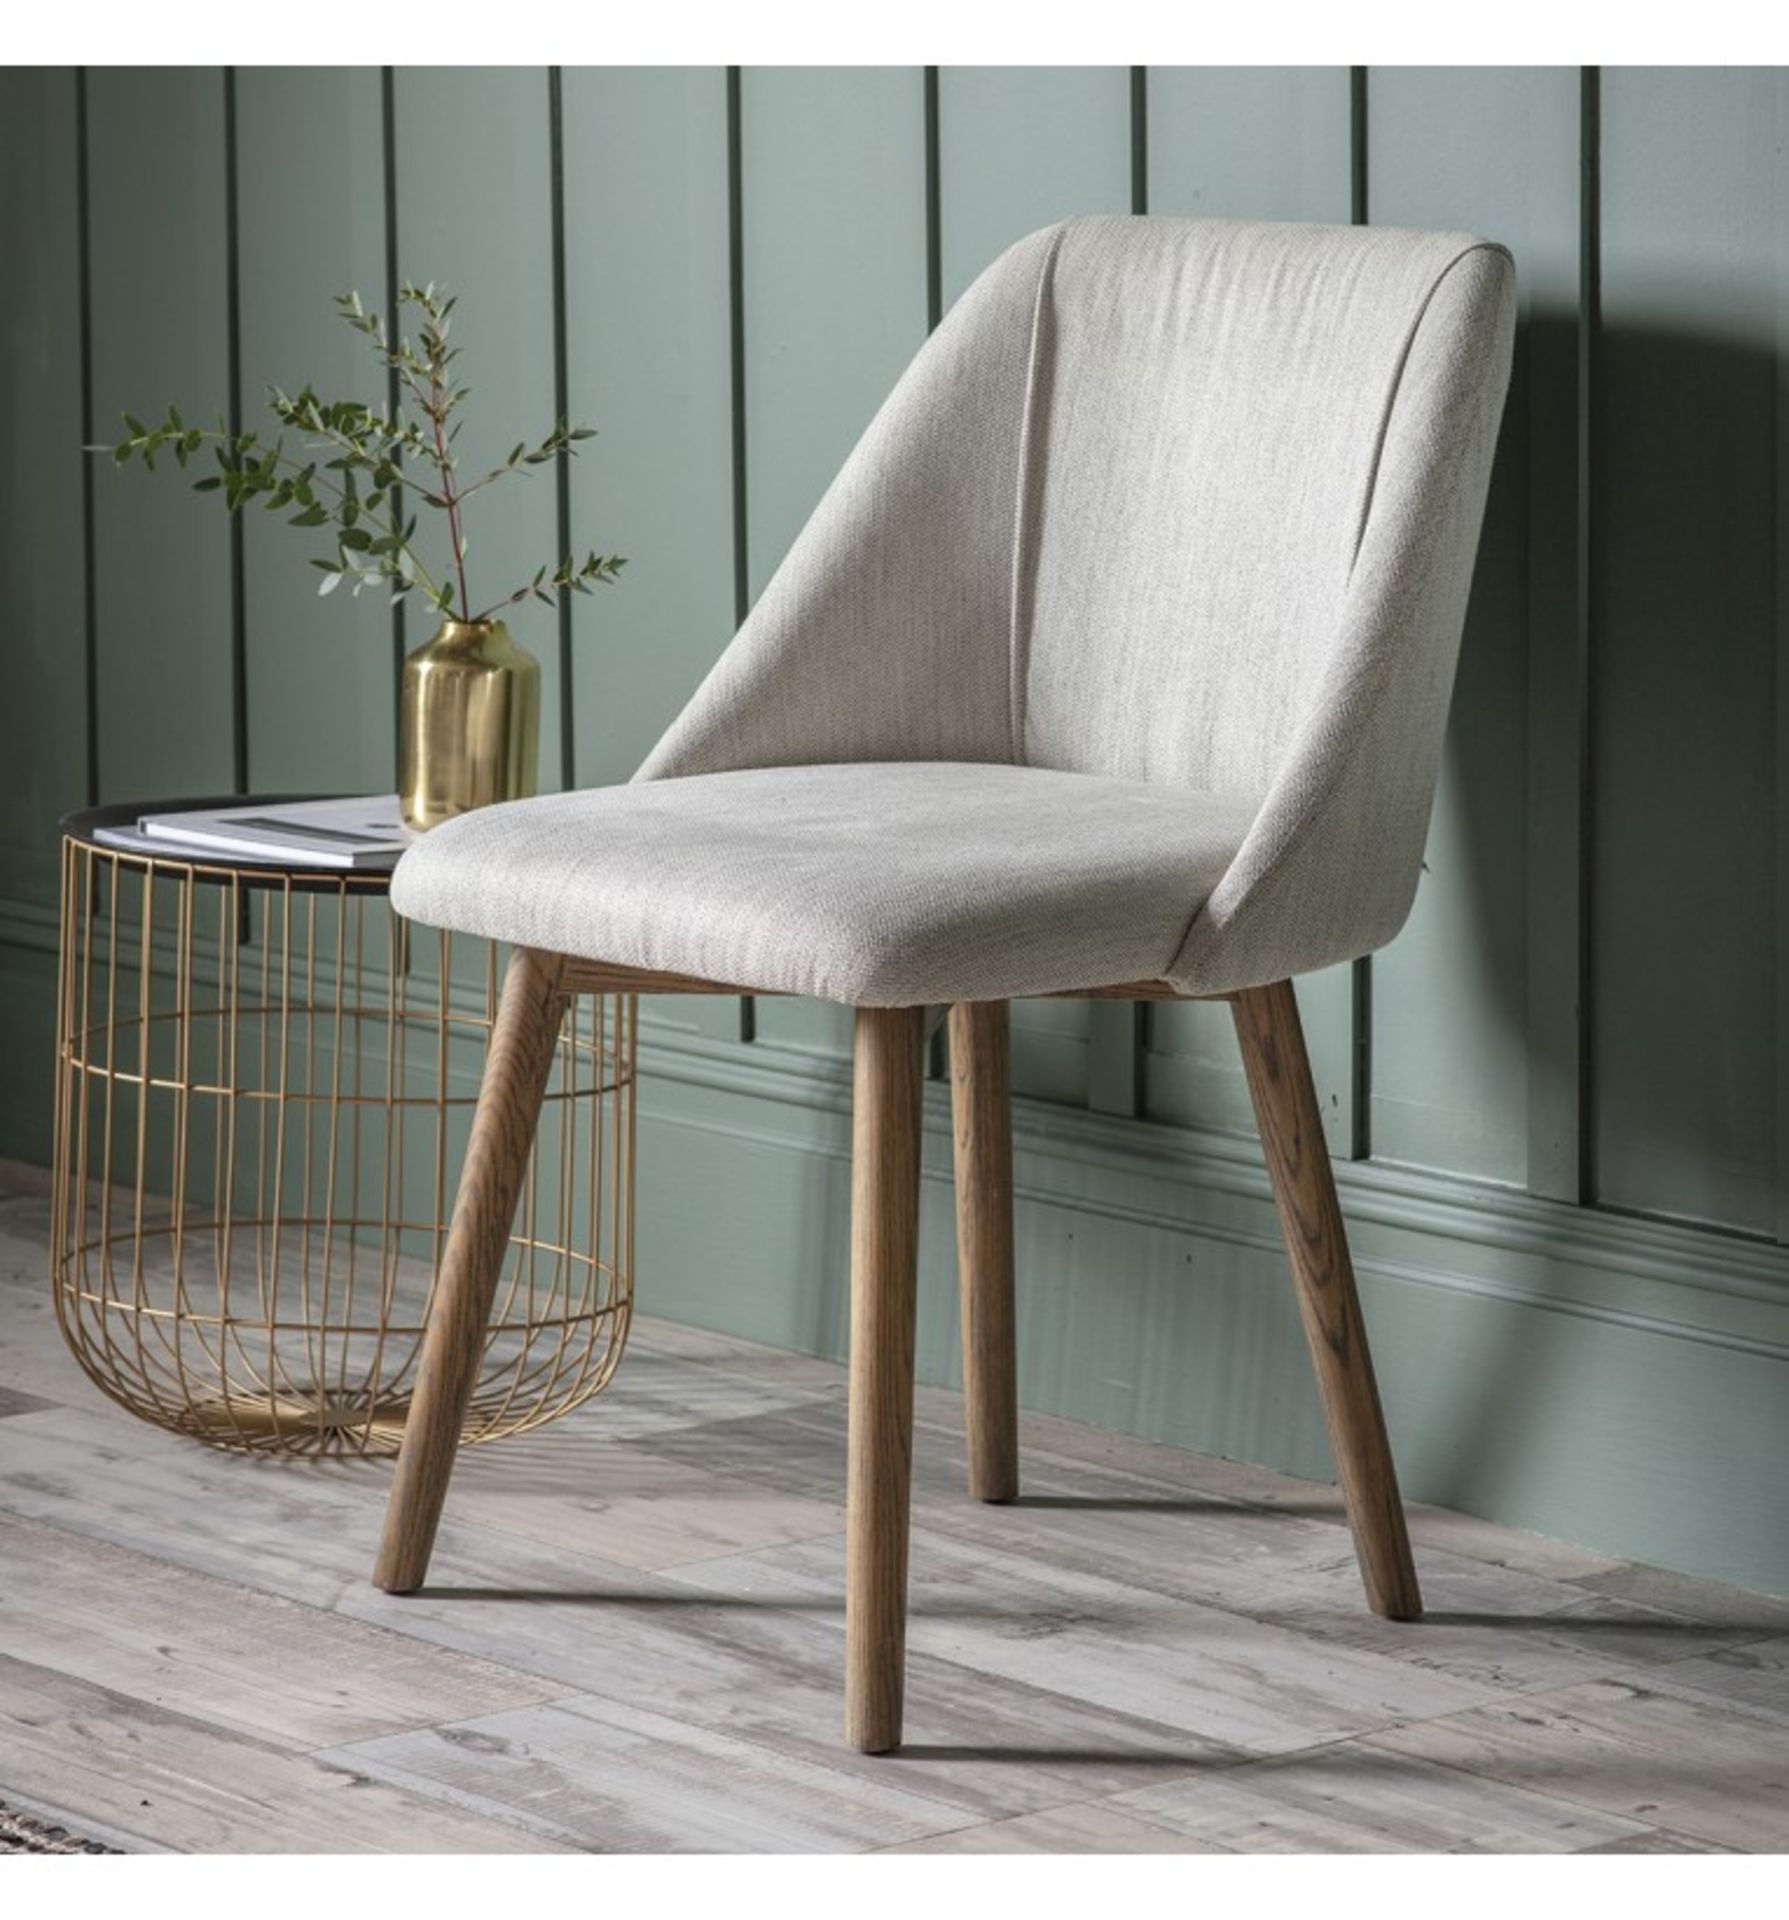 Elliot Dining Chair Perfect for dining in style the Elliot Dining Chair in a contemporary upholstery